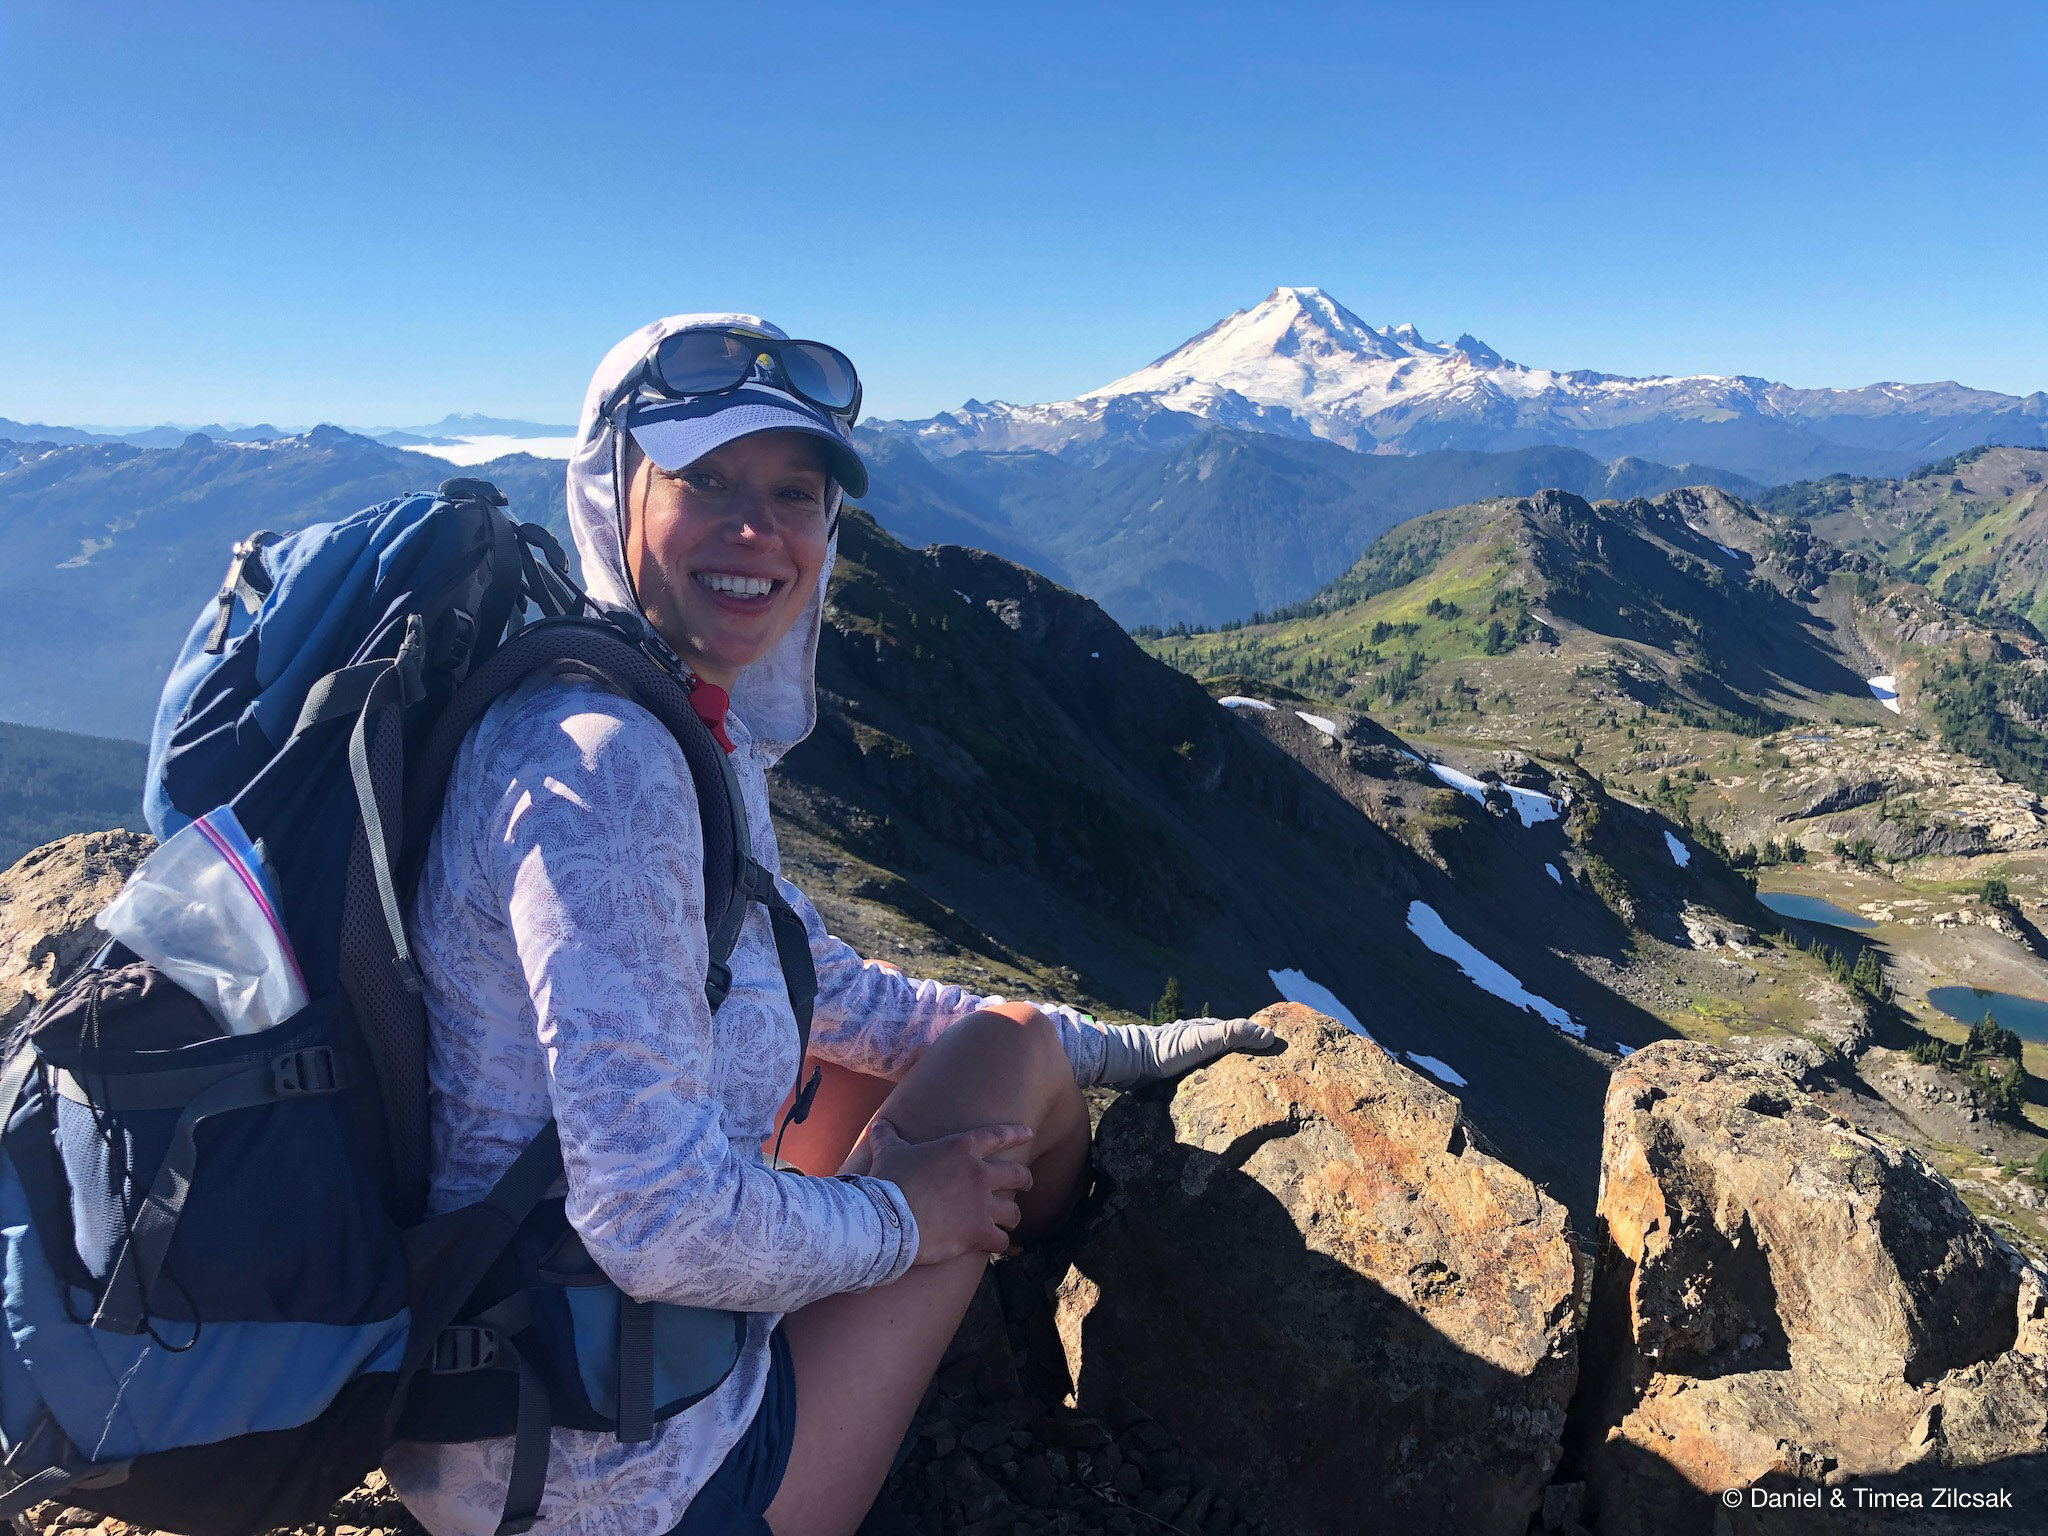 On the summit of Yellow Aster Butte with Mt Baker in sight